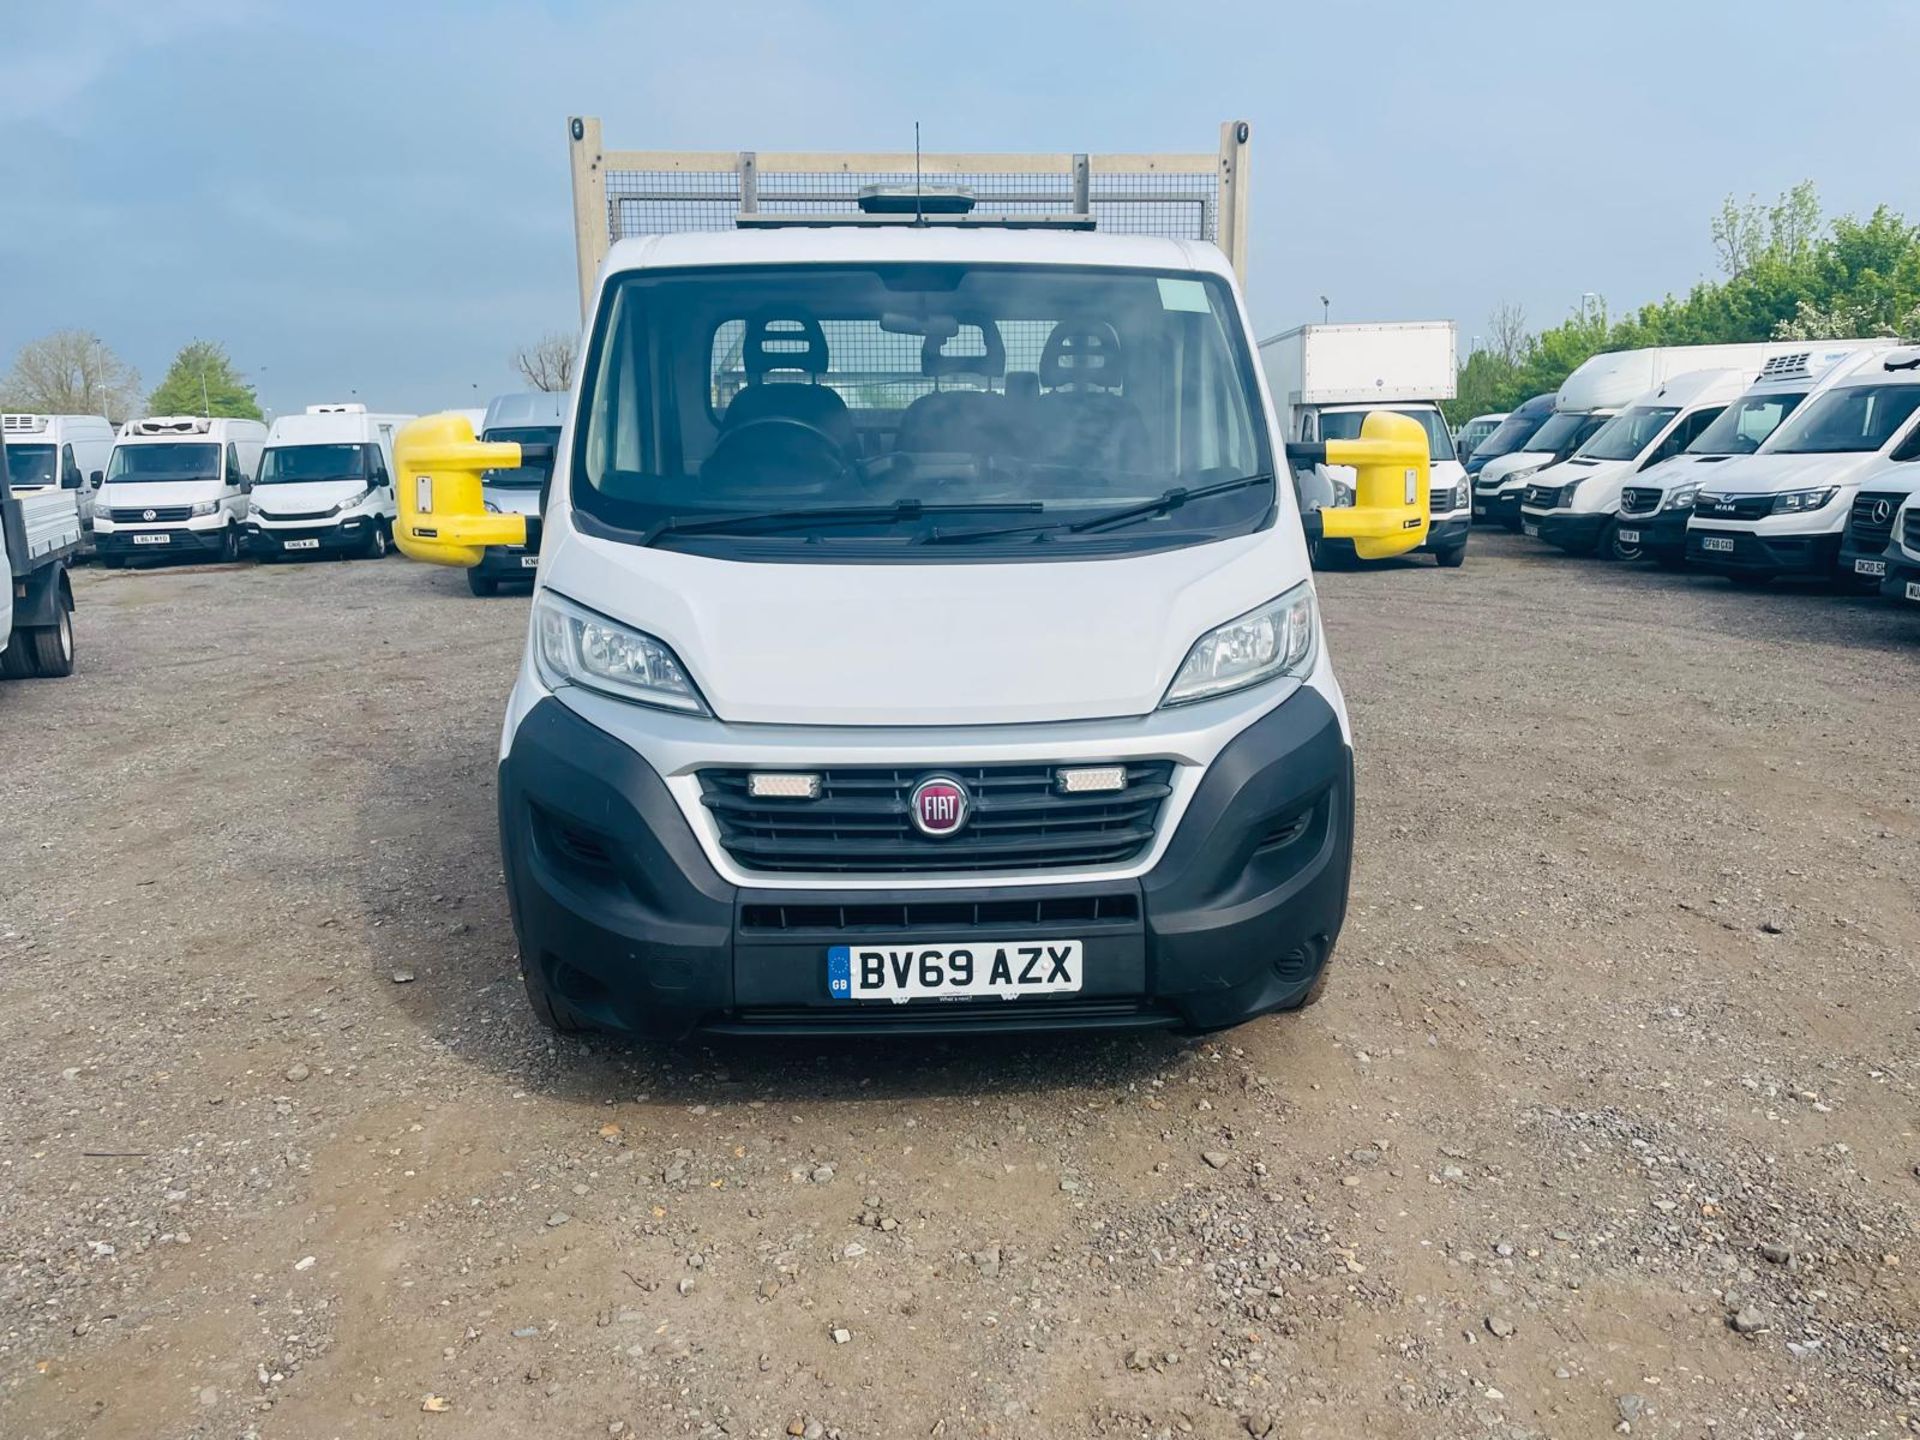 Fiat Ducato 35 Maxi 2.3 MultiJet 130 L3H1 Dropside 2019 '69 Reg'-1 Former keepers - Only 76,029 - Image 2 of 27